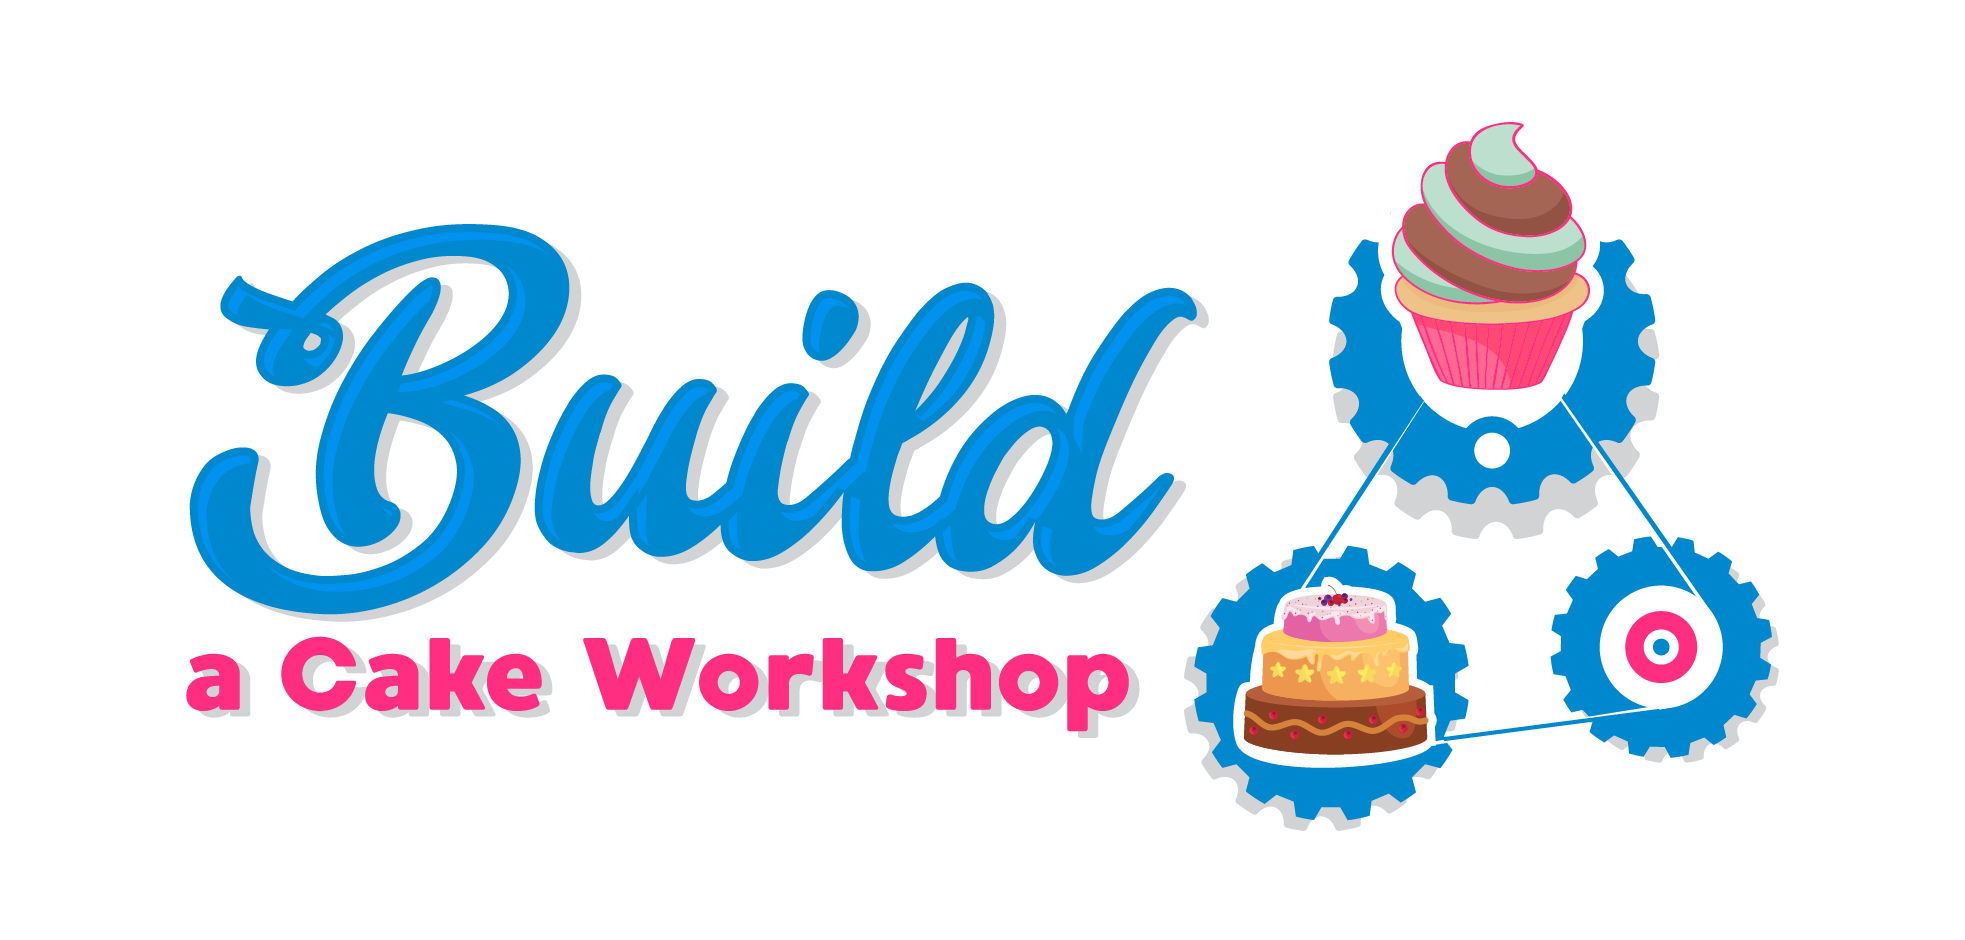 The Build a Cake Worskhop